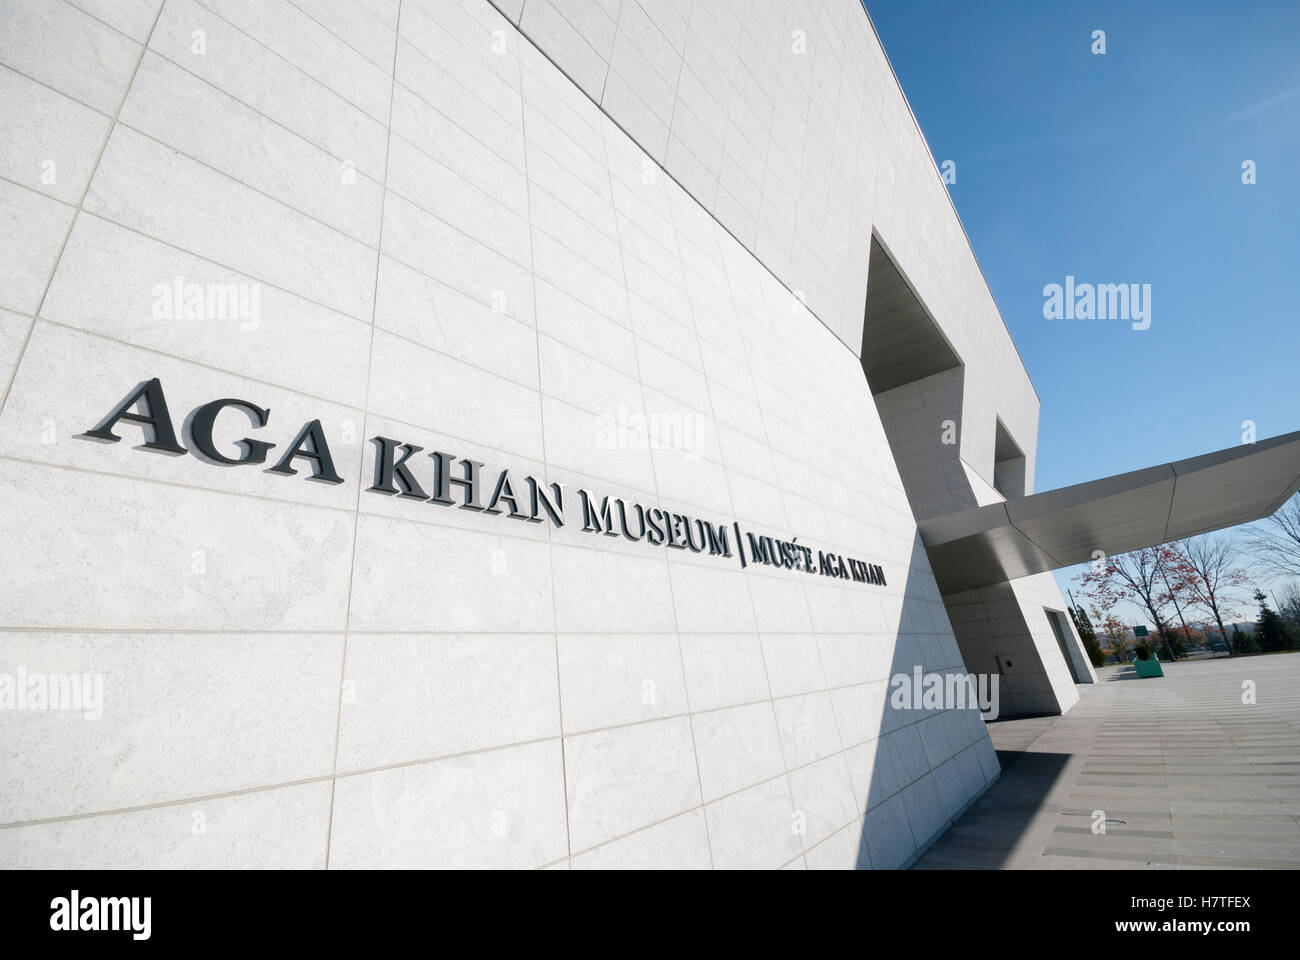 The dramatic exterior of the Aga Khan Museum, a museum of Islamic art, Iranian art and Muslim culture in Toronto, Ontario Stock Photo